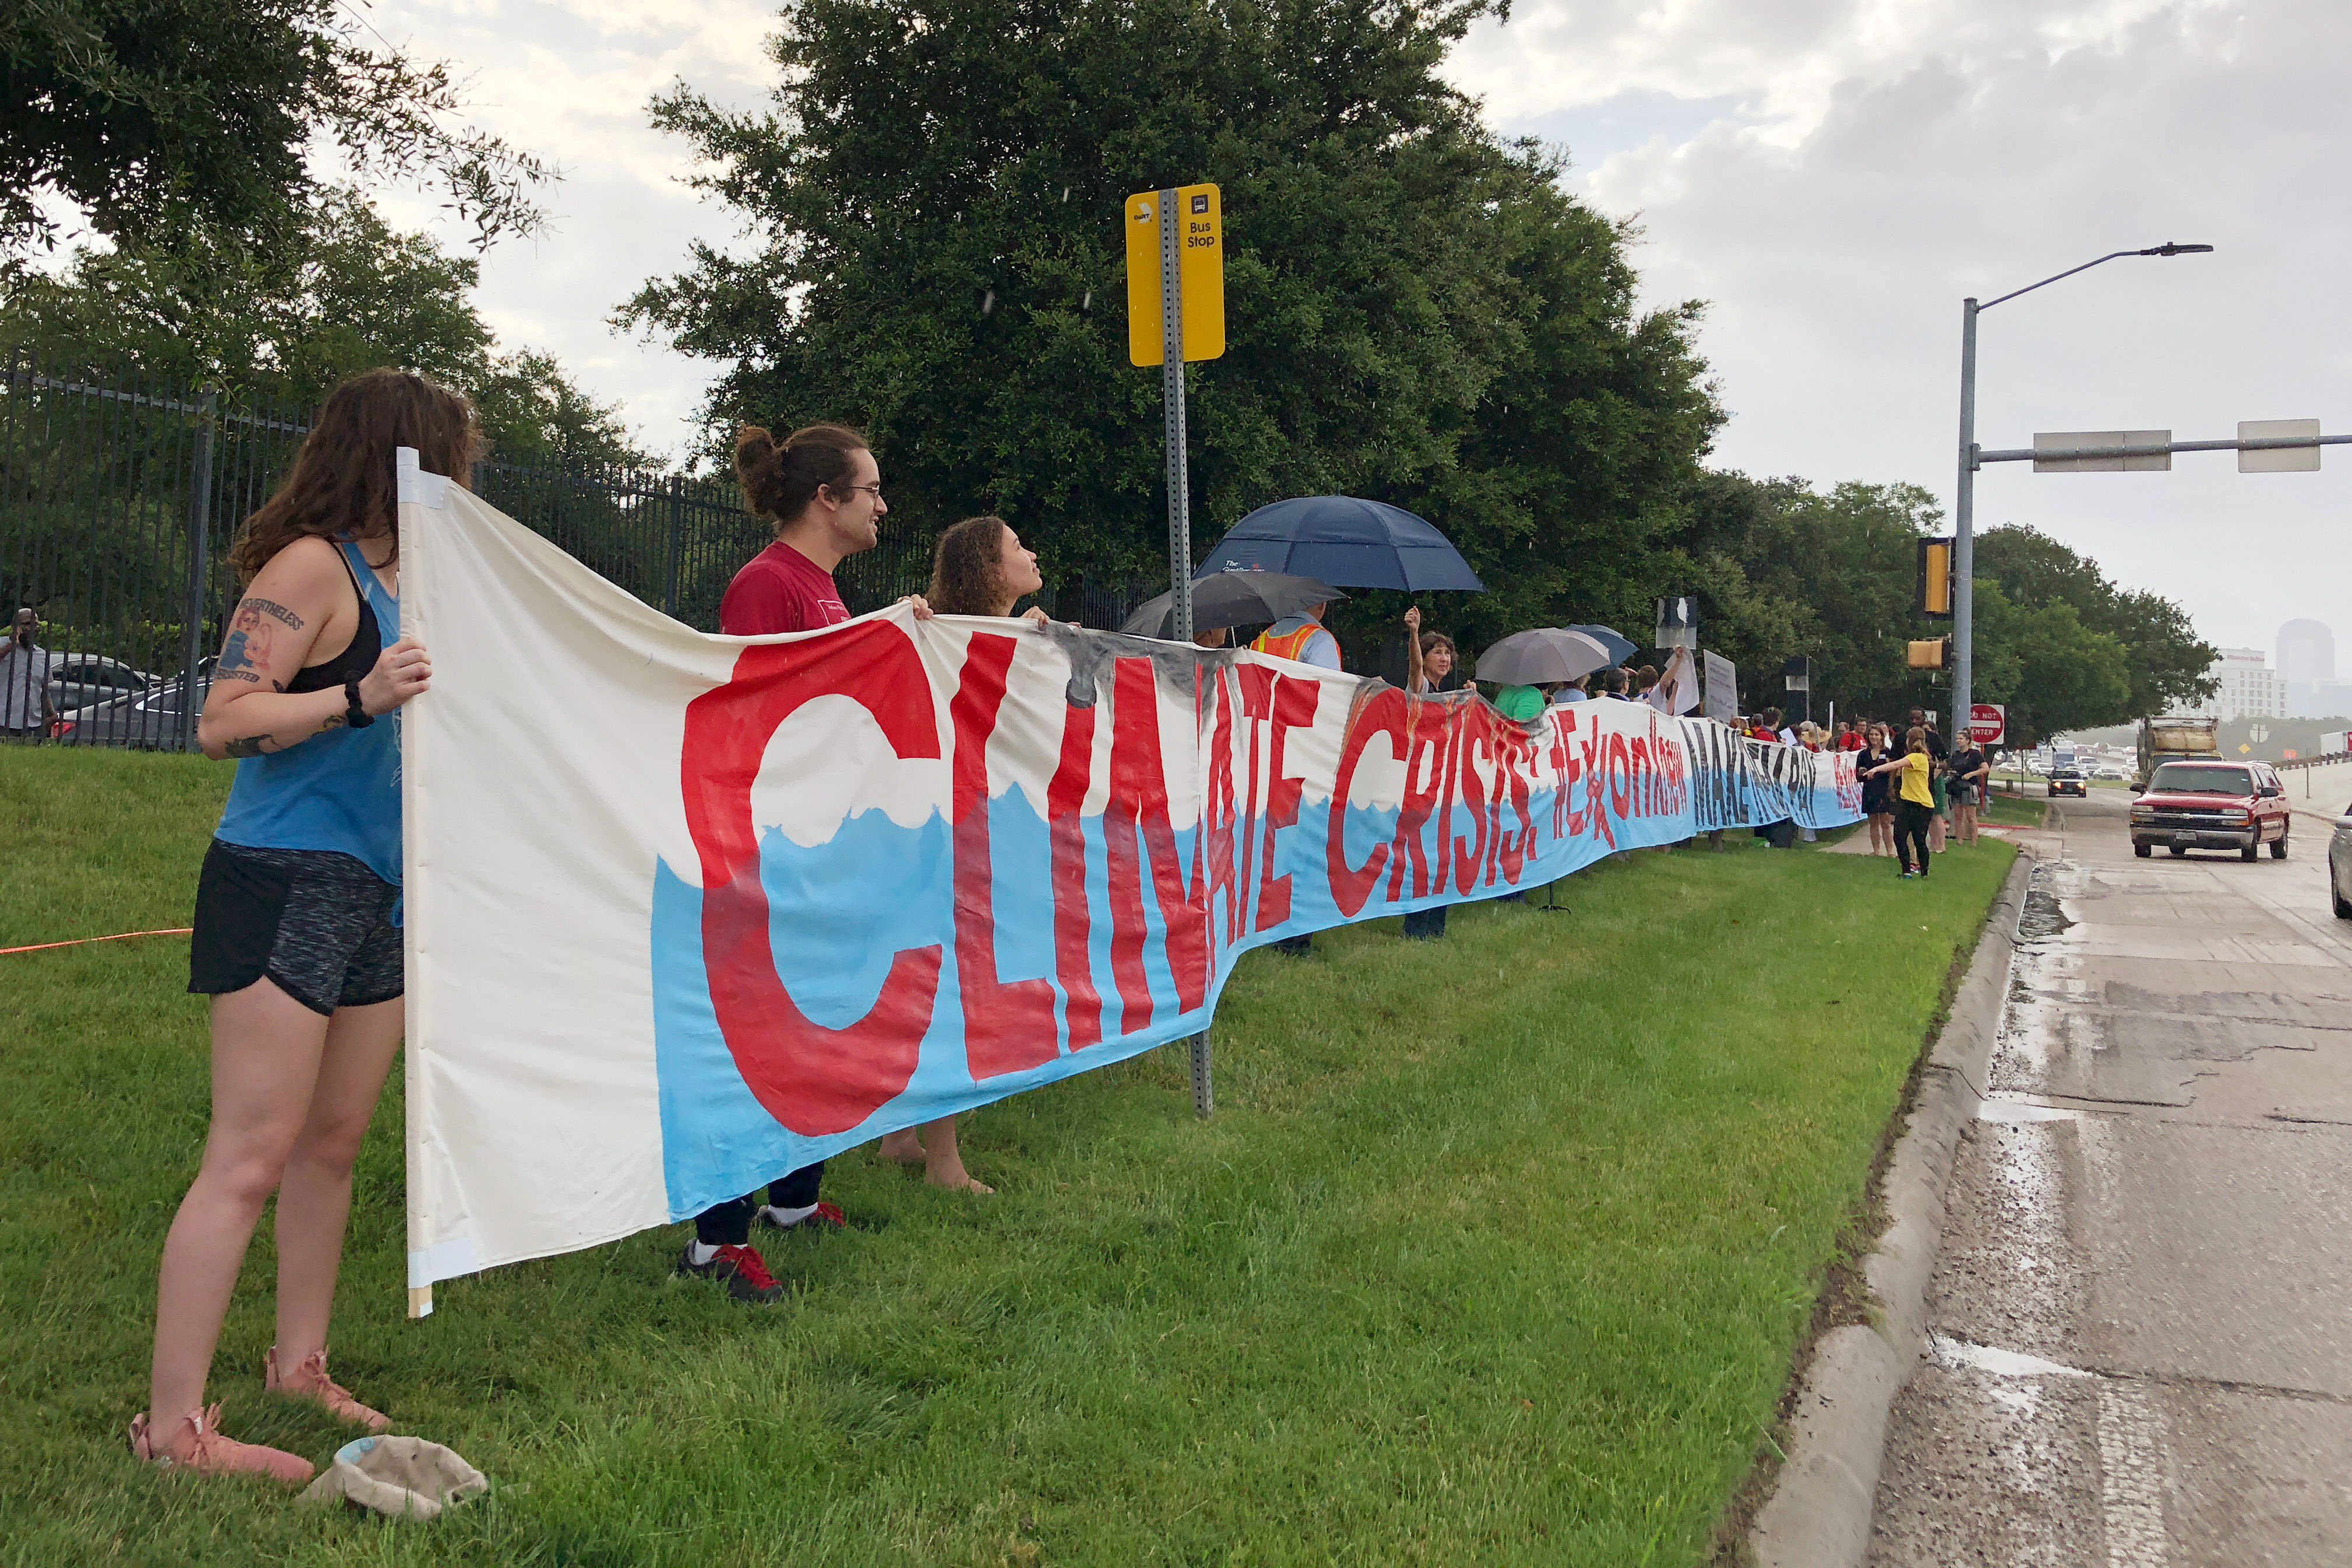 Protestors gather outside the ExxonMobil annual shareholders meeting to protest the company’s climate policies as people arrive at the 2019 annual shareholders meeting in Dallas